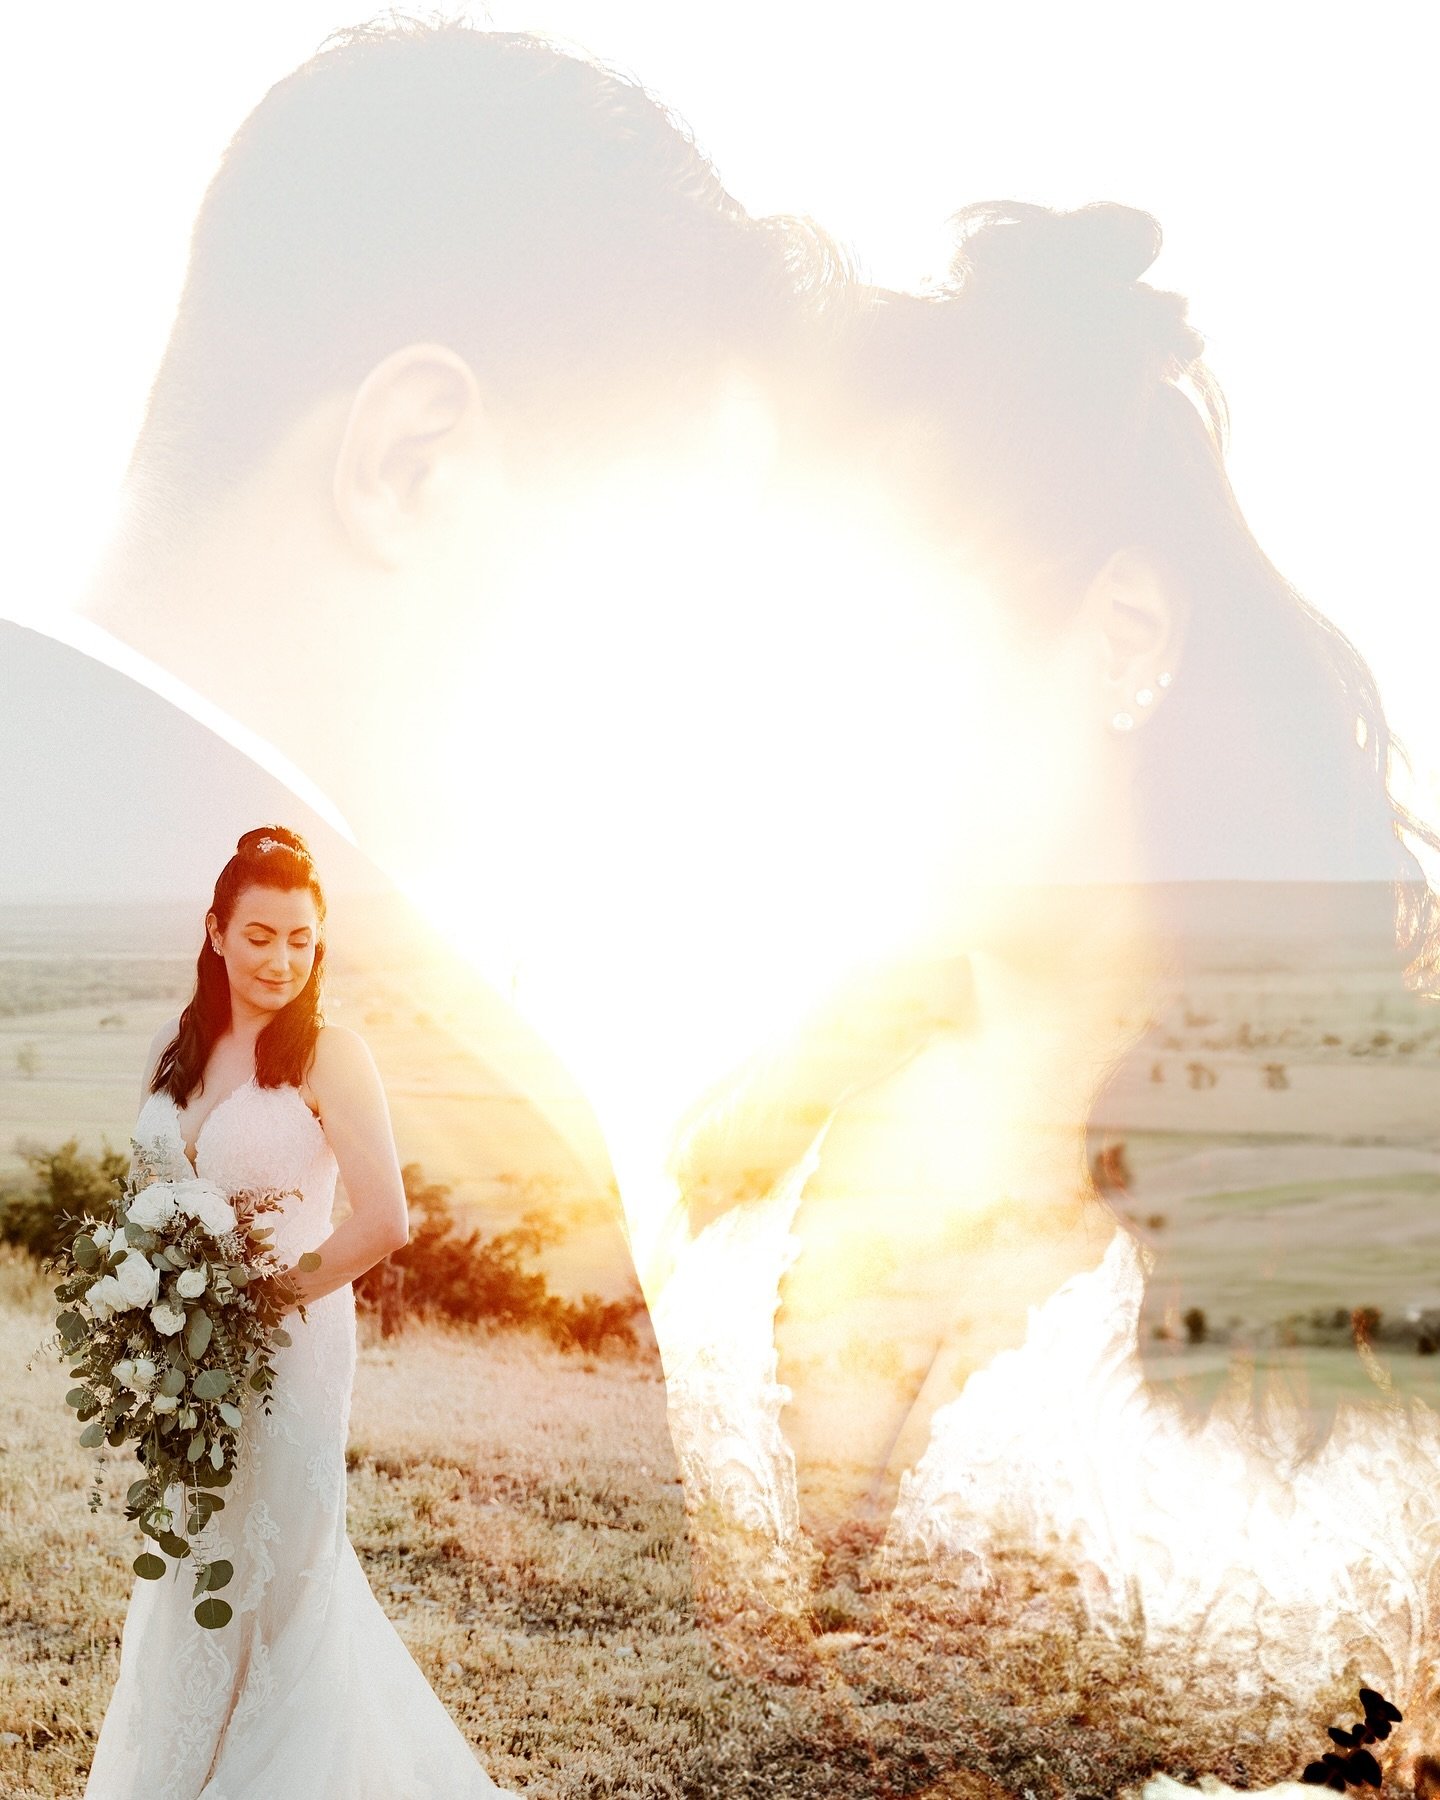 Loving how this double exposure came out! 💕 So thankful for golden hour just beaming with beautiful colors that day 😊 #austinwedding #austinweddings #austinweddingphotographer #fredericksburg #fredericksburgtx #fredericksburgwedding #fredericksburg